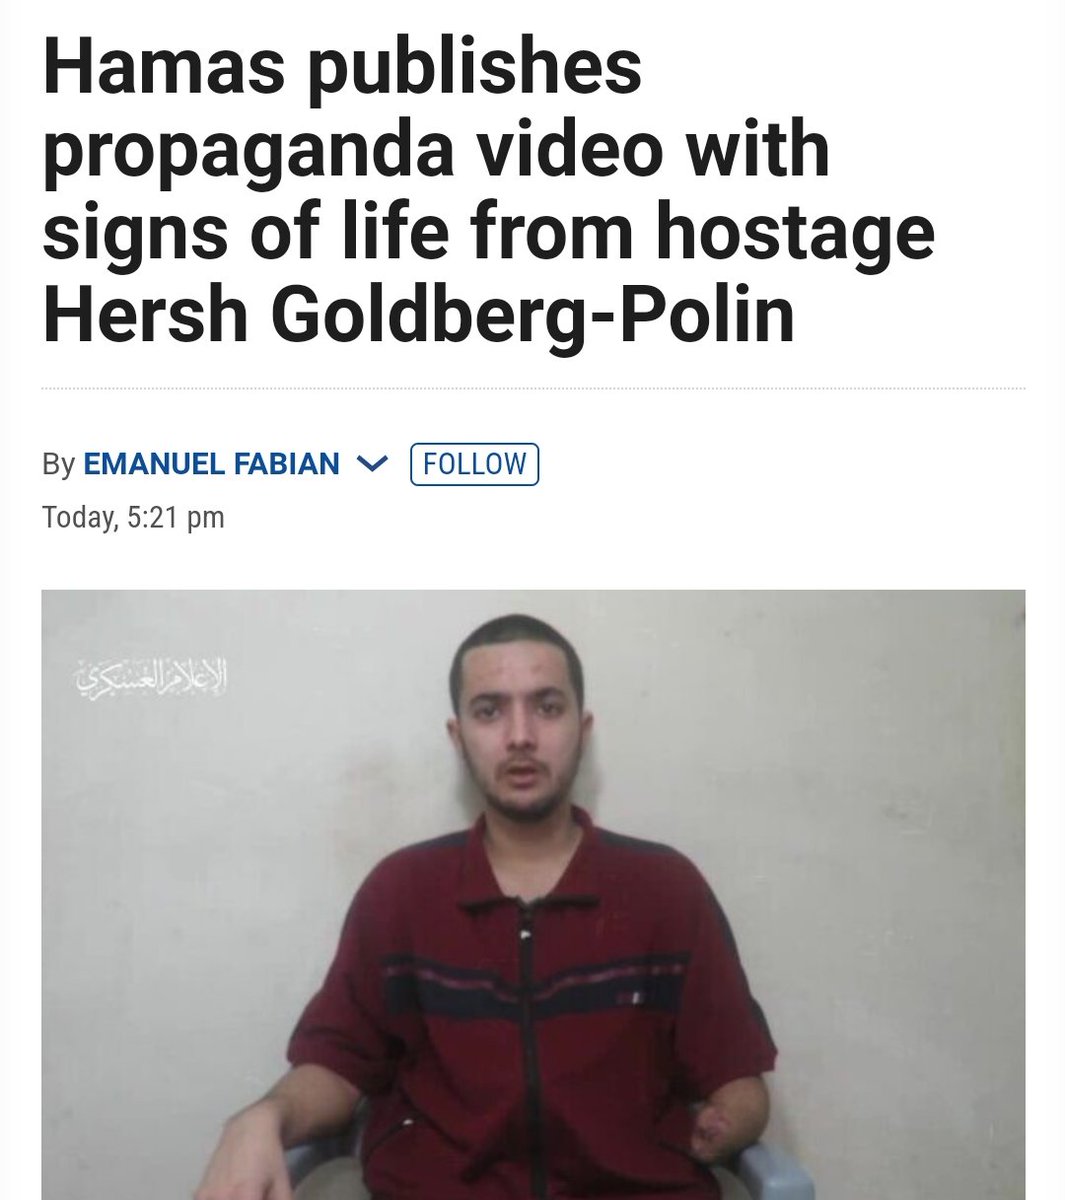 This is absolutely sick. Hamas sat down a hostage, whose arm they blew off, and recorded a scripted video with ominous music and poor editing, accusing Israel/Netanyahu of neglecting Israelis. This is a war crime on multiple levels.

The same people who dismissed the confessions